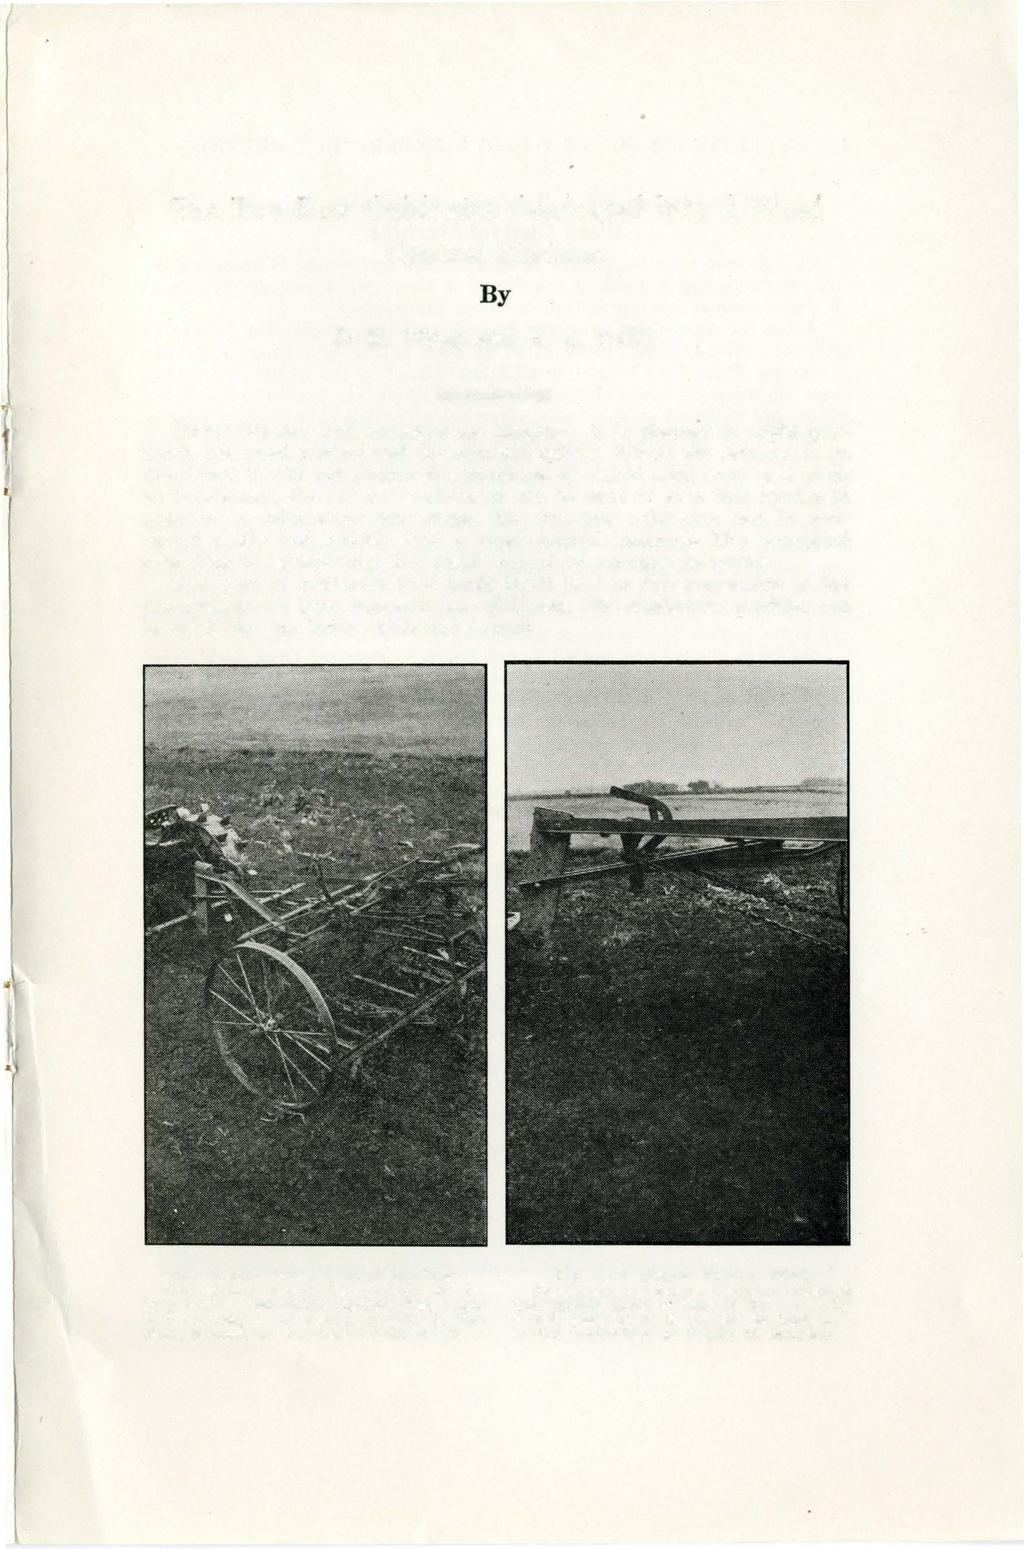 The Two-Row Cultivator Converted Into A Weeci Control Machine By D. E. Wiant and R. L.